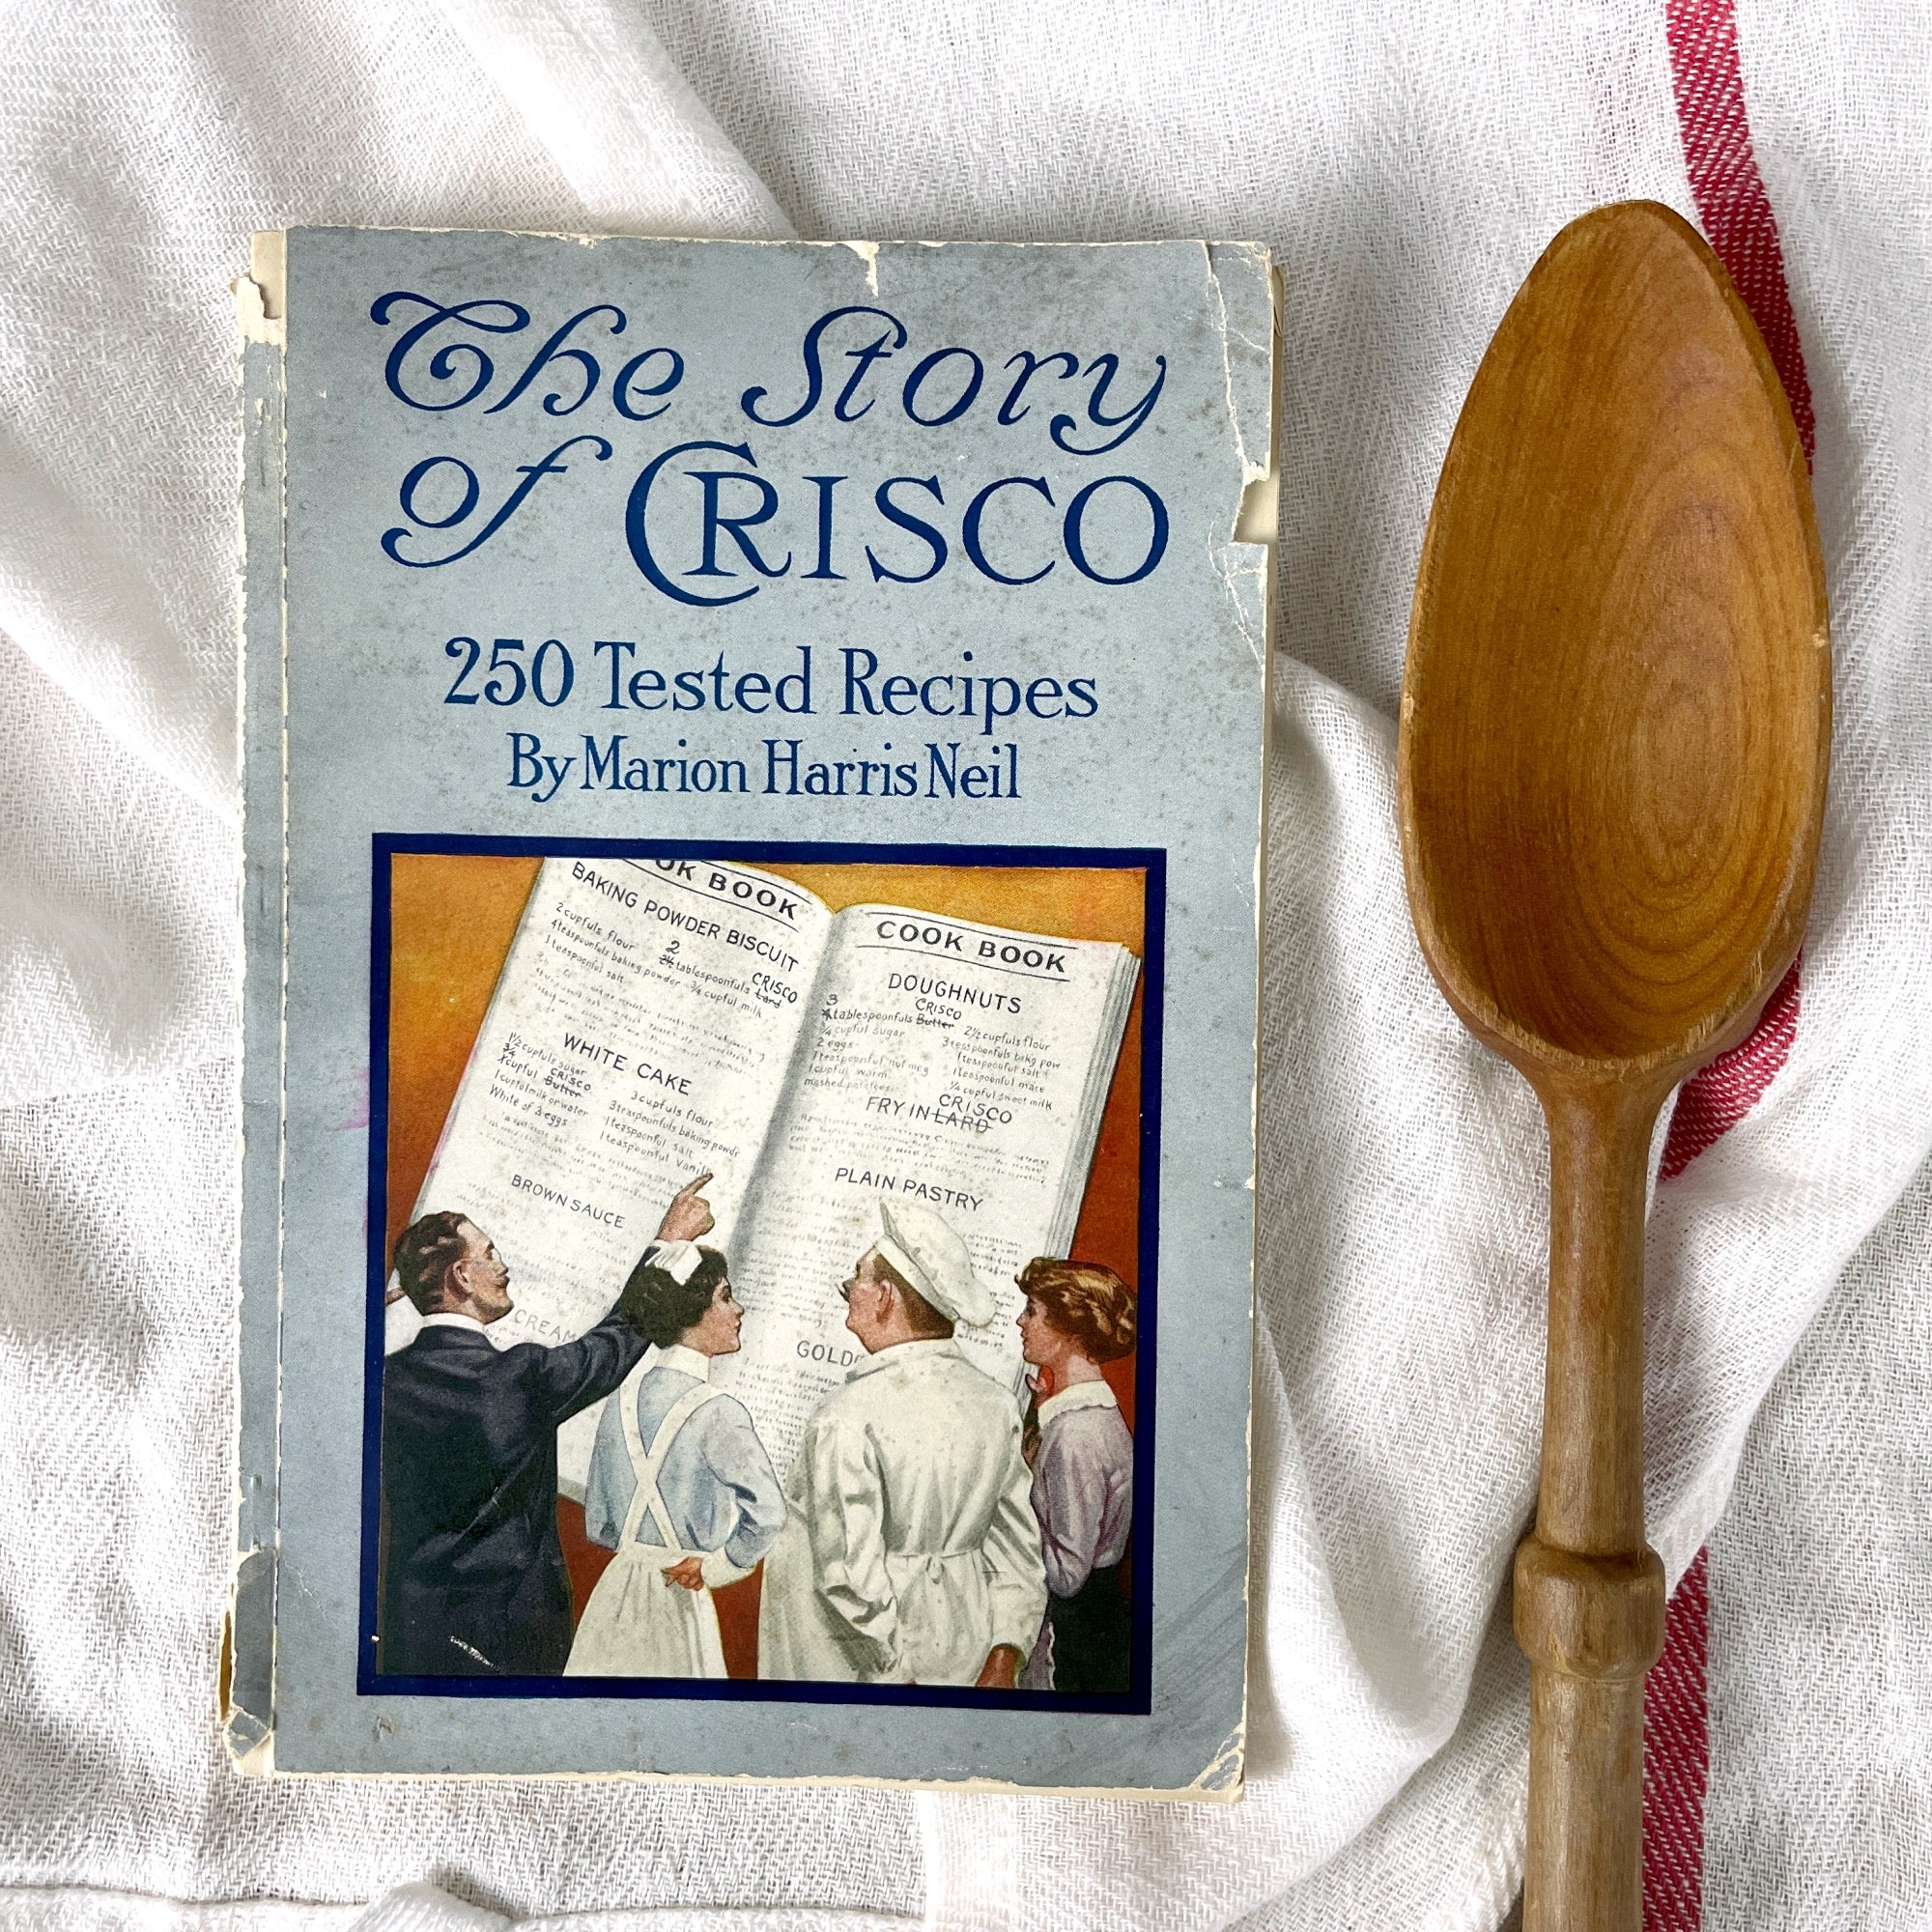 Crisco and Jews: A story 4,000 years in the making